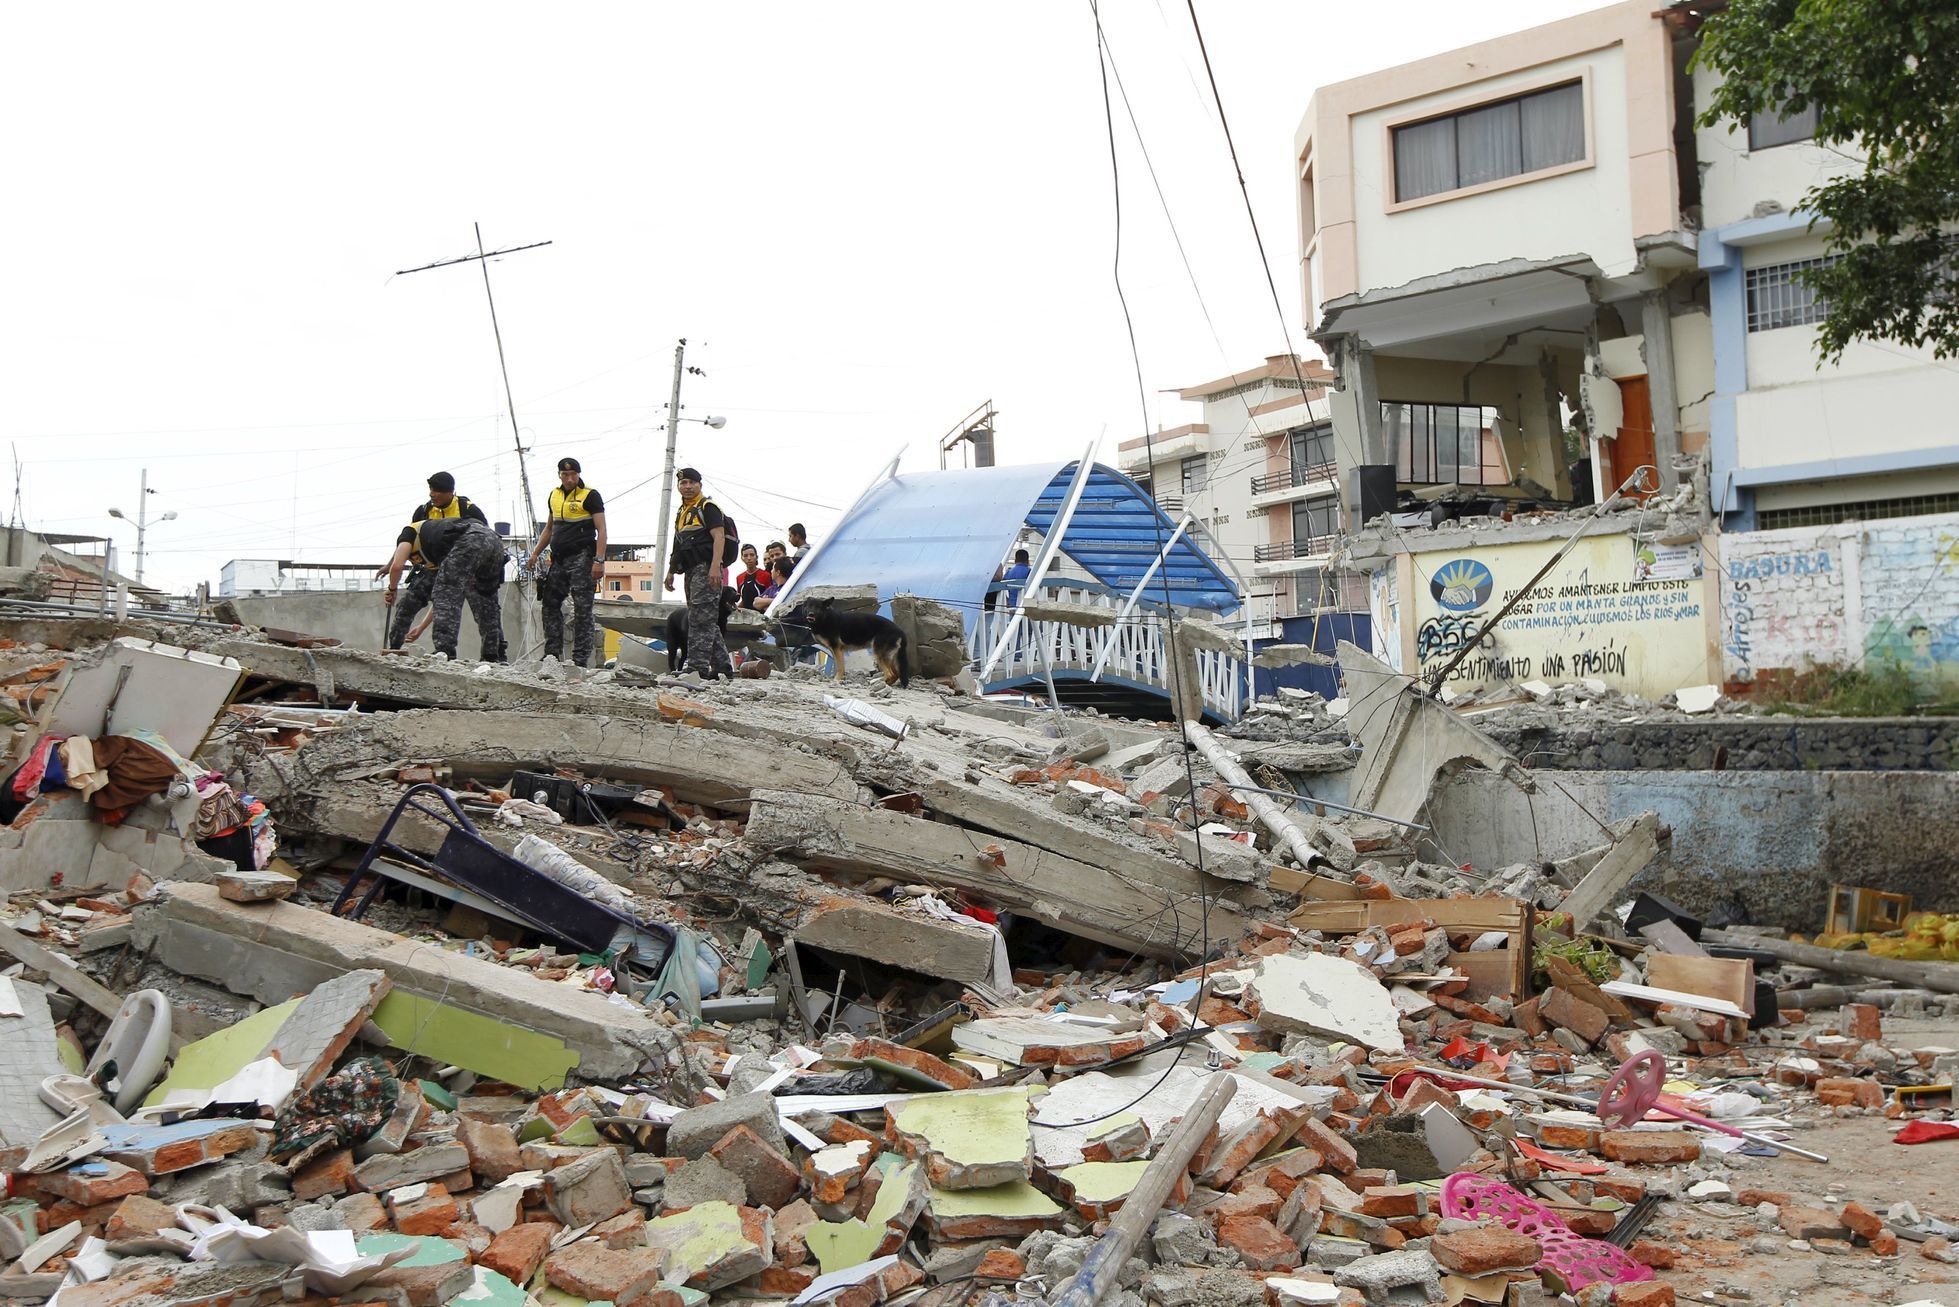 Police officers stand on debris after an earthquake struck off Ecuador's Pacific coast, at Tarqui neighborhood in Manta